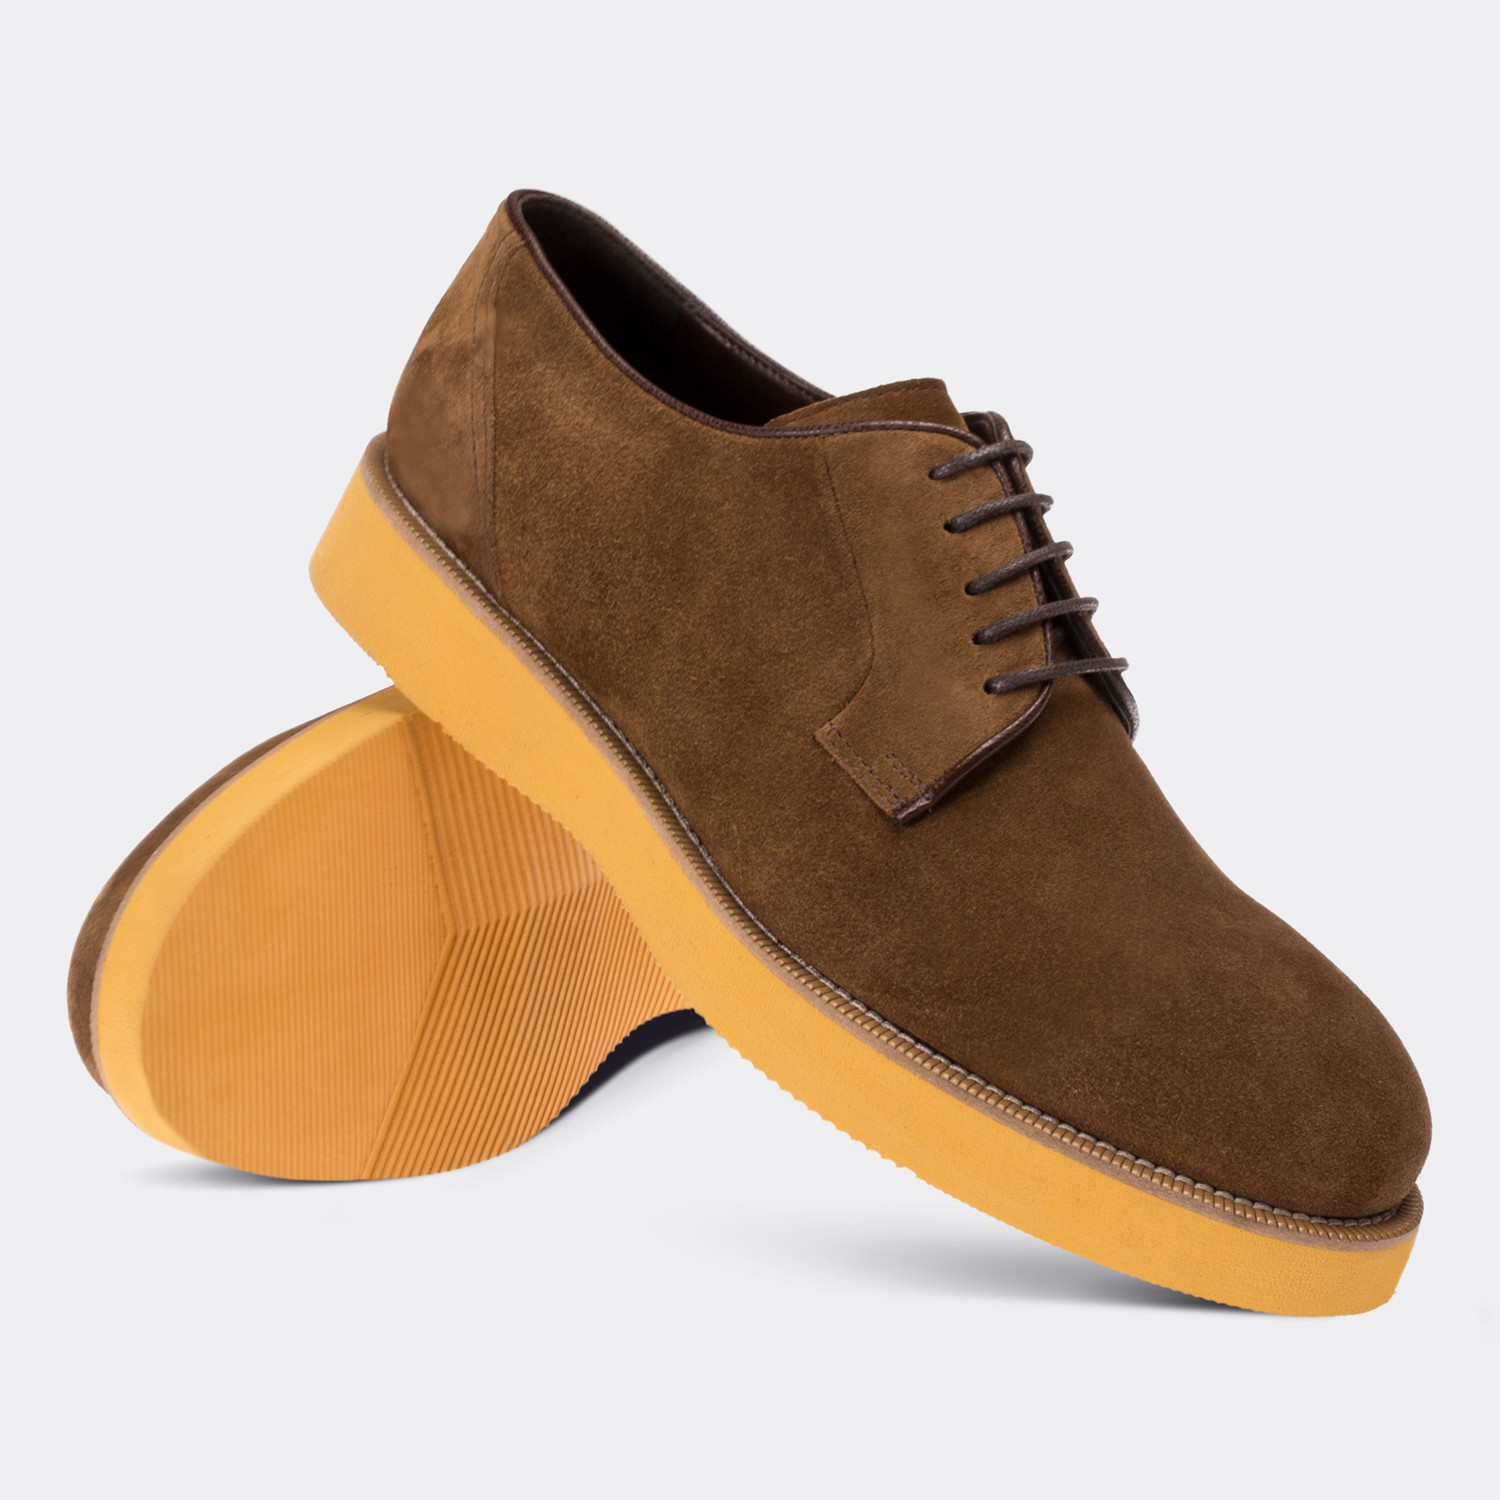 Deery Brown Leather Sneakers : Size - 44